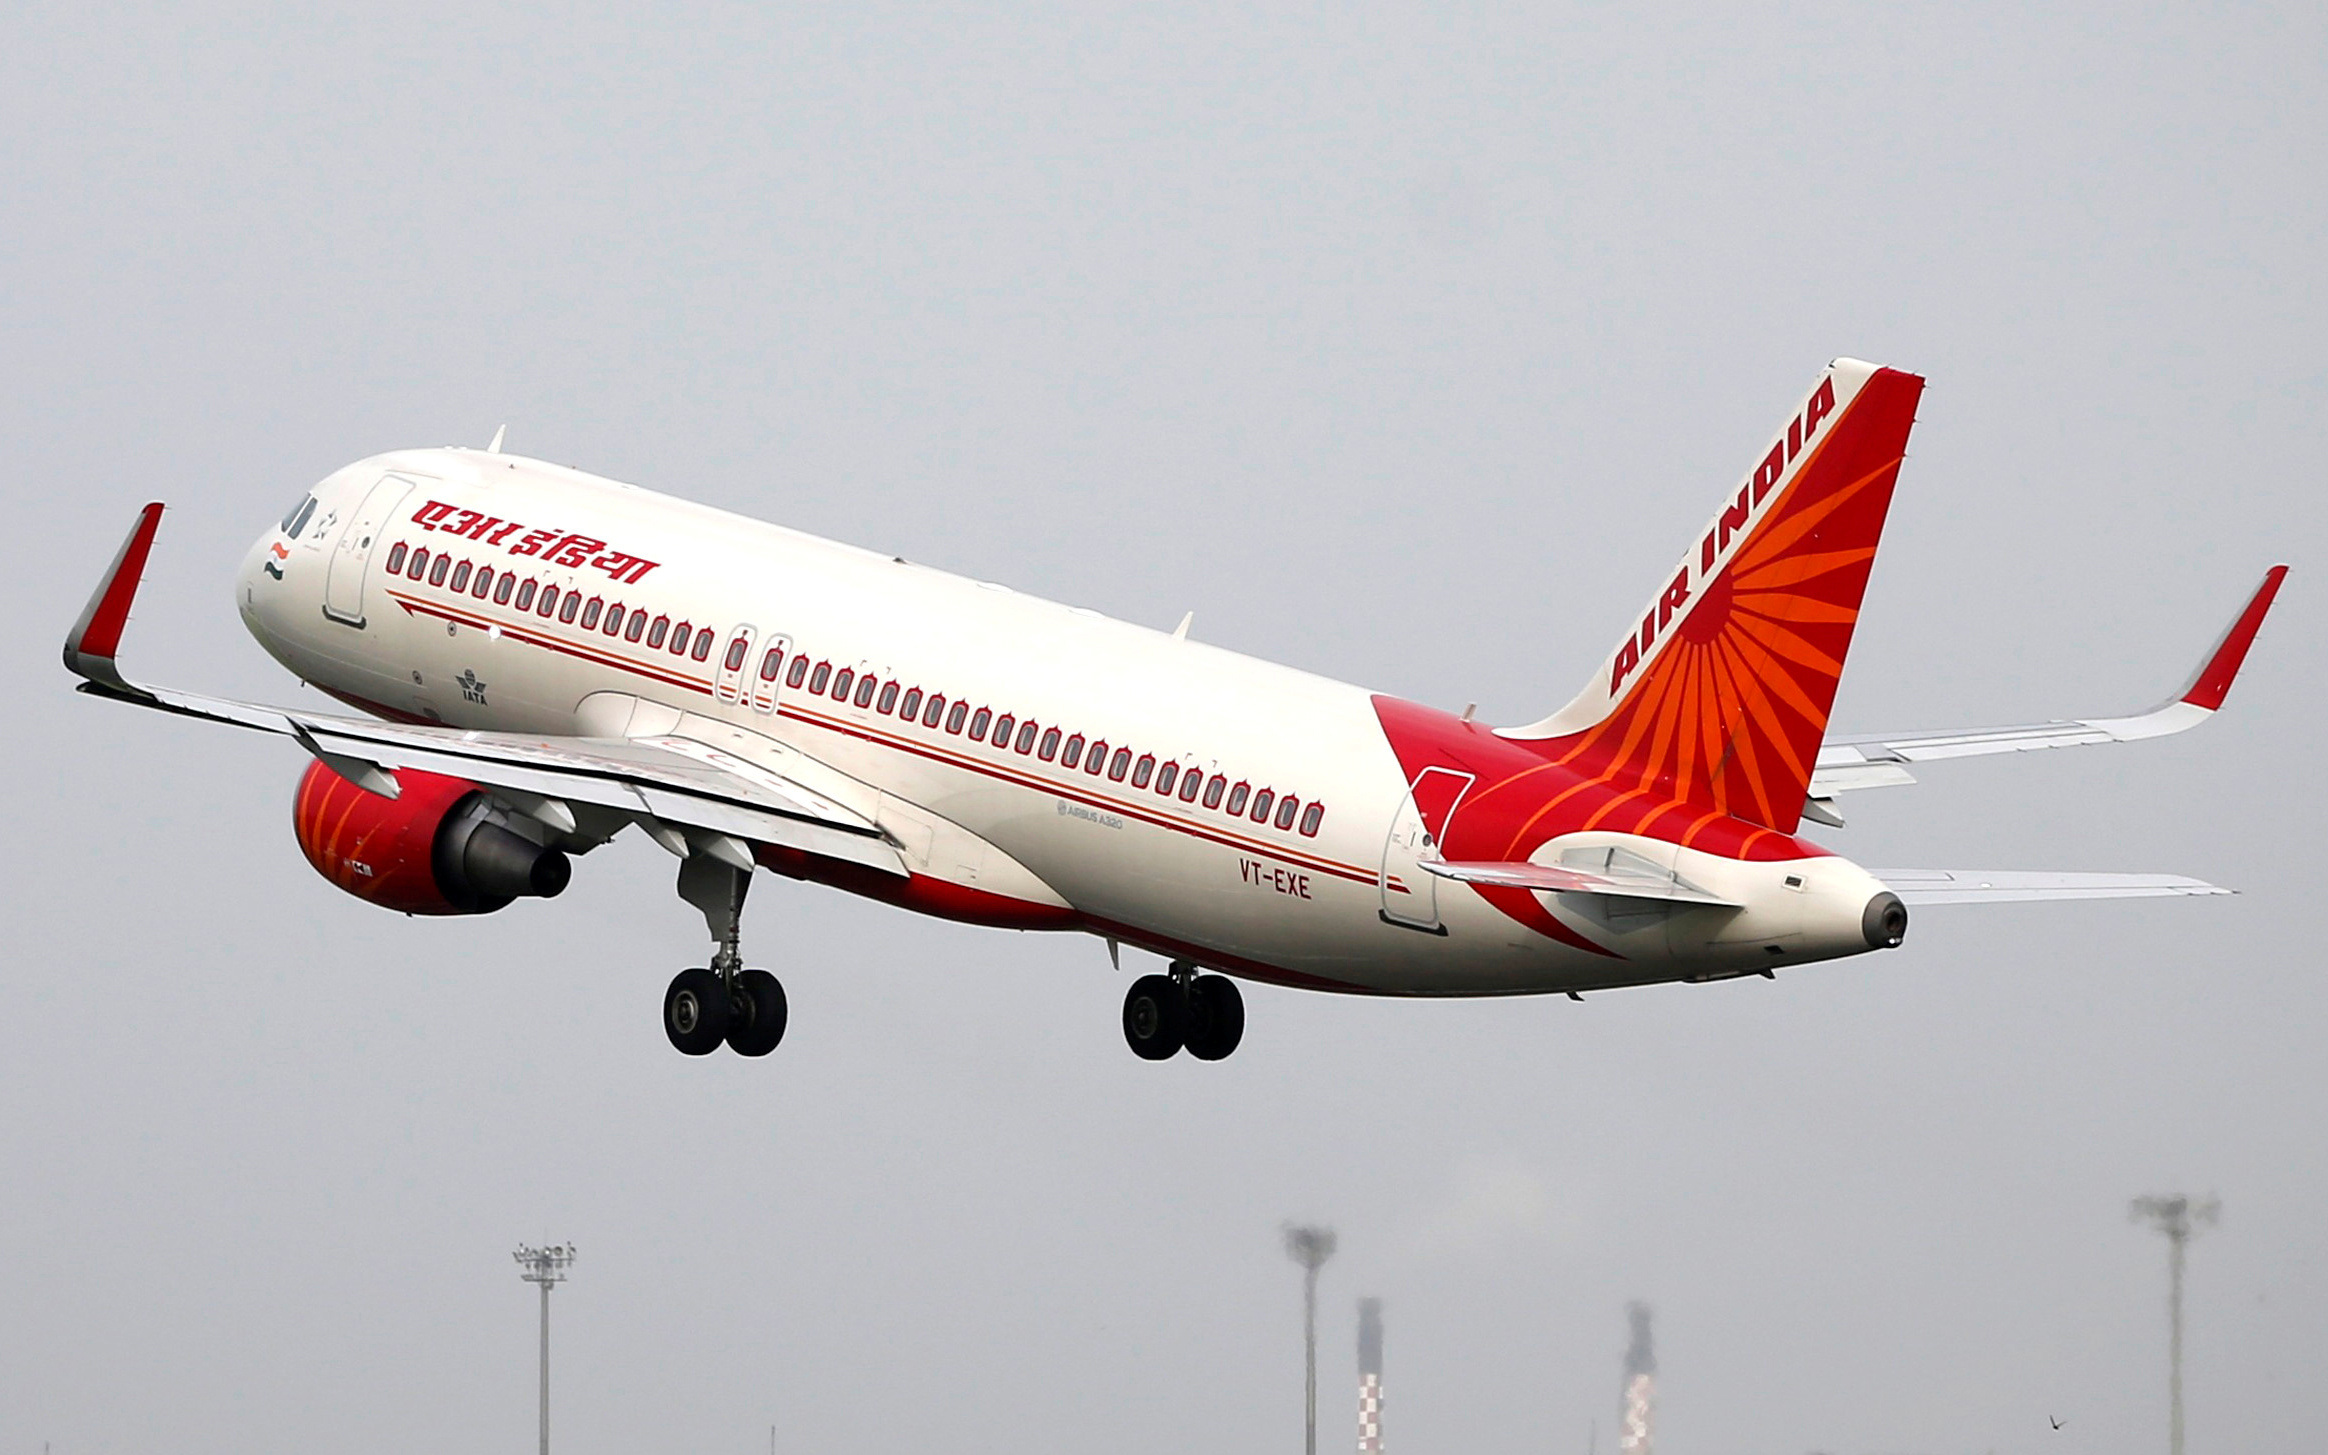 An Air India Airbus A320 aircraft takes off from the Sardar Vallabhbhai Patel International Airport in Ahmedabad